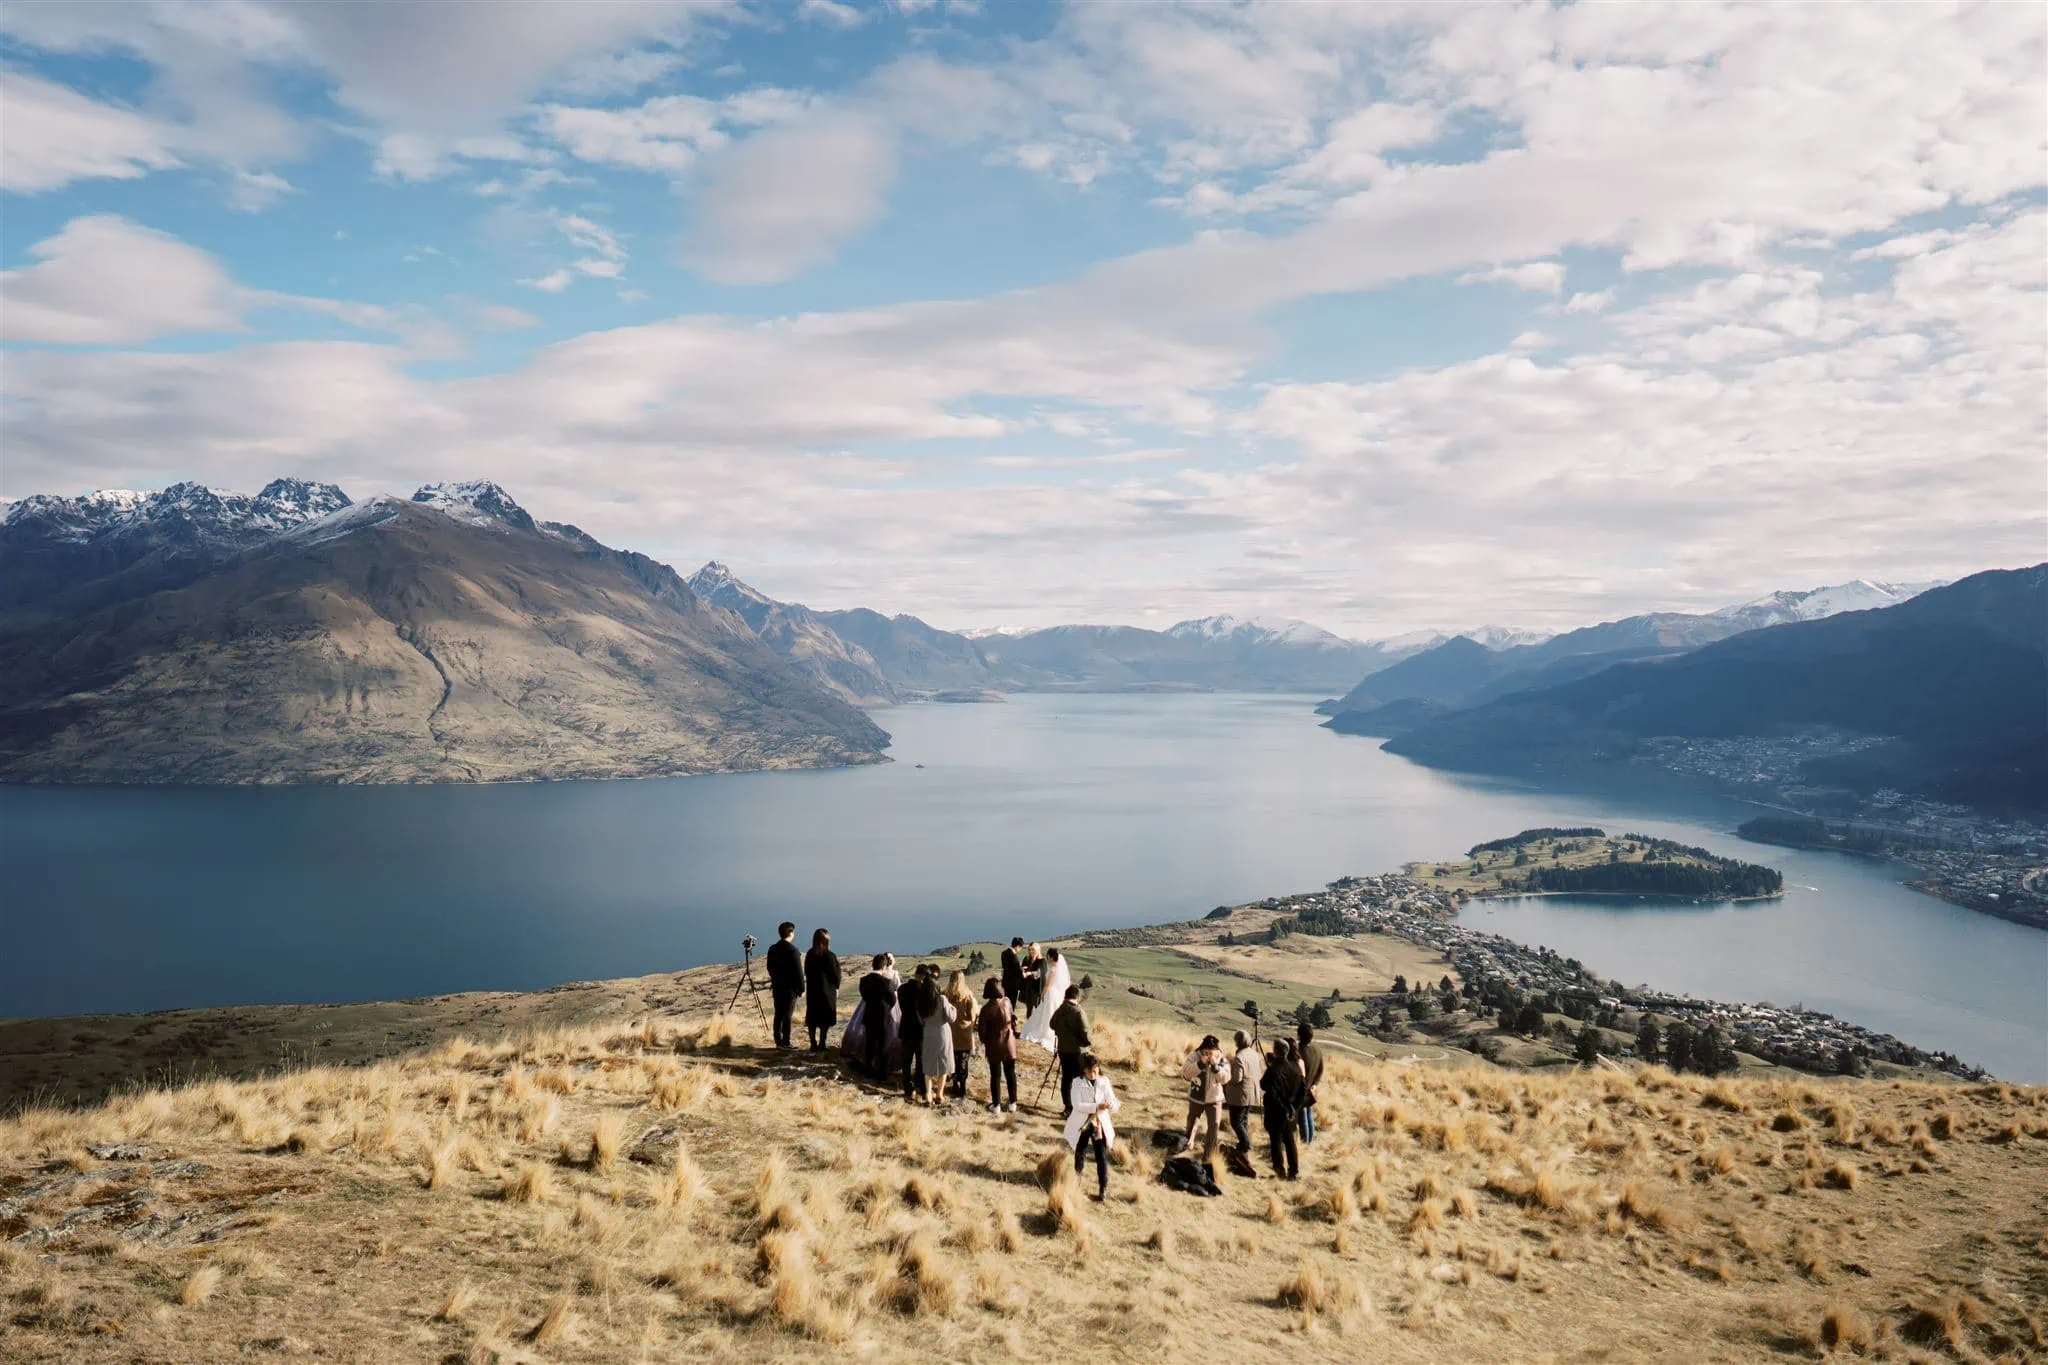 Queenstown New Zealand Elopement Wedding Photographer - A group of people standing on top of a hill overlooking Lake Wakatipu, comparing the costs of elopement and traditional weddings.